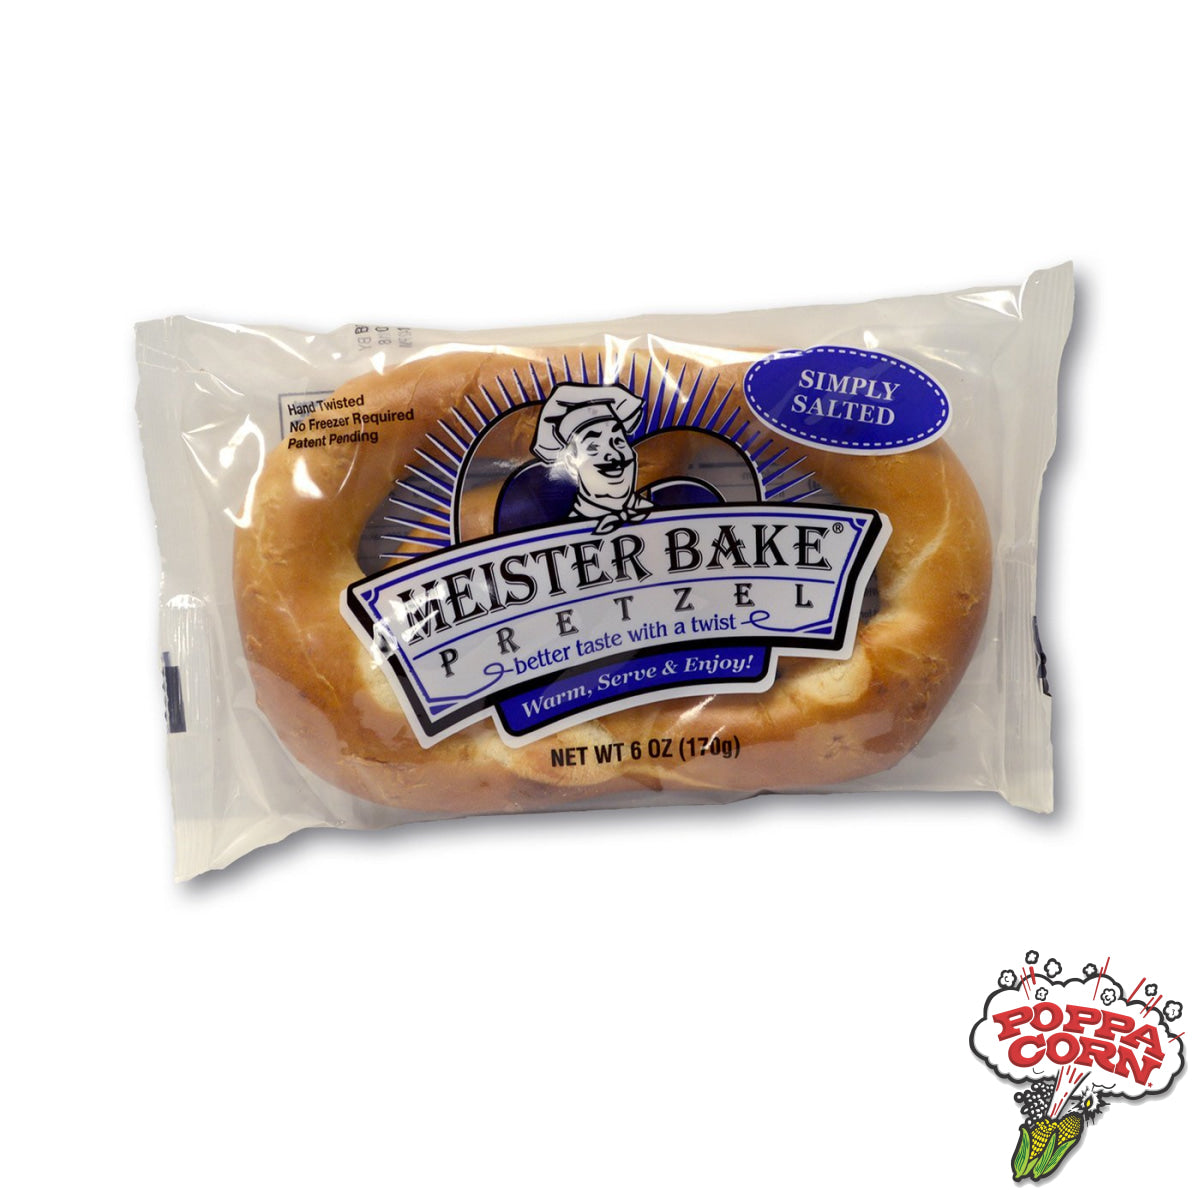 Meister Bake® Ready to Eat Salted Pretzels - GM5627 - Poppa Corn Corp